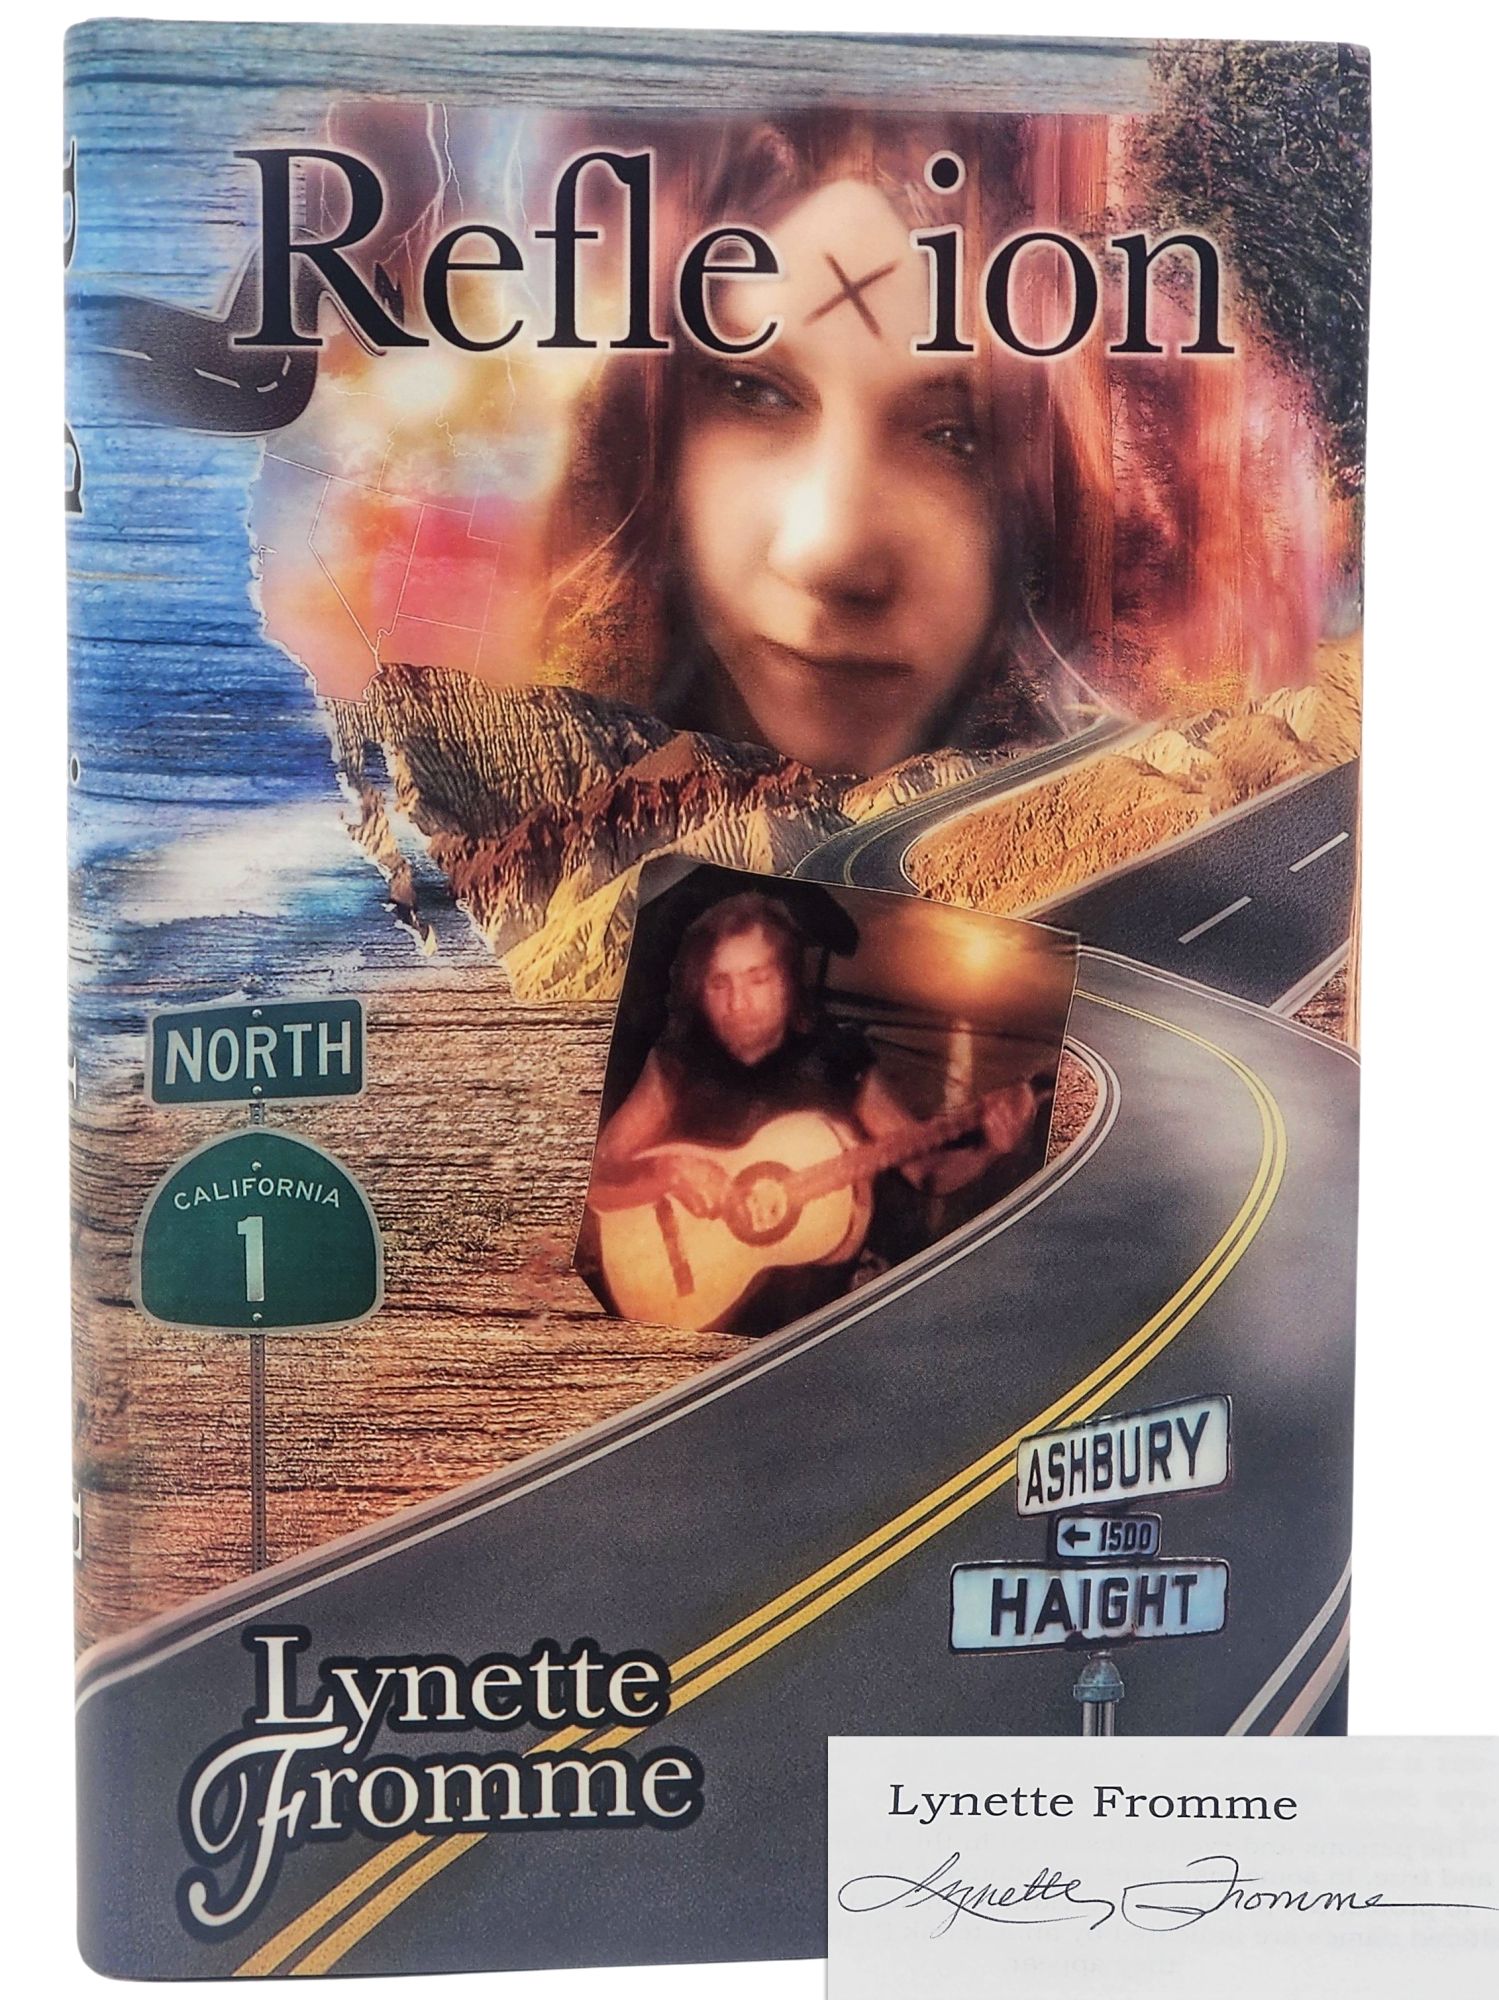 [Book #51051] REFLEXION. Lynette Fromme, "Squeaky"